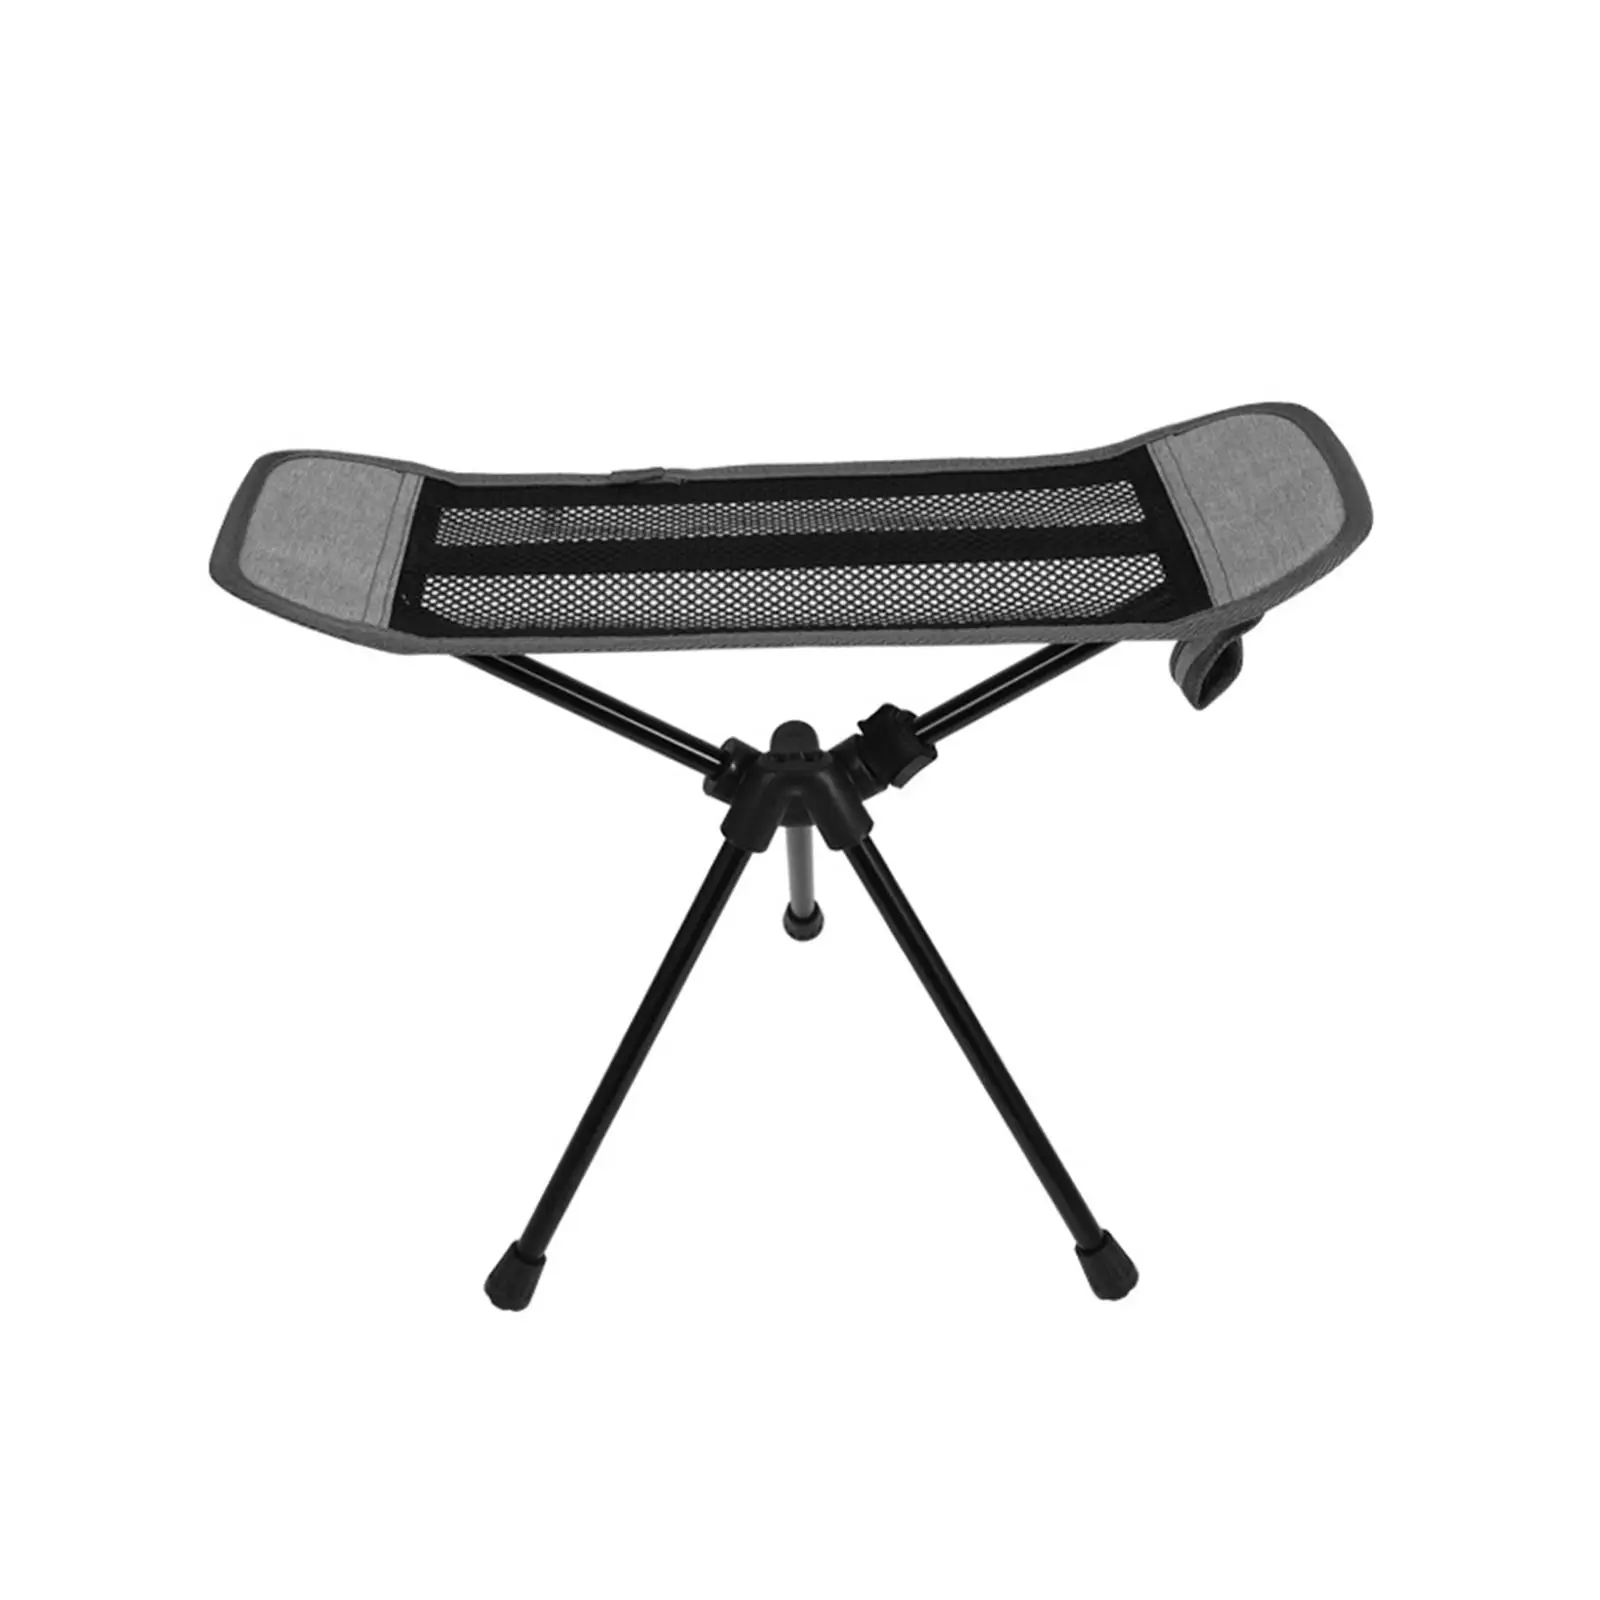 Folding Foot Rest Stool Leg Rest AntiSlip Feet Foot Support Moon Chair Footrest Foldable Camping Chair Footrest for Hiking